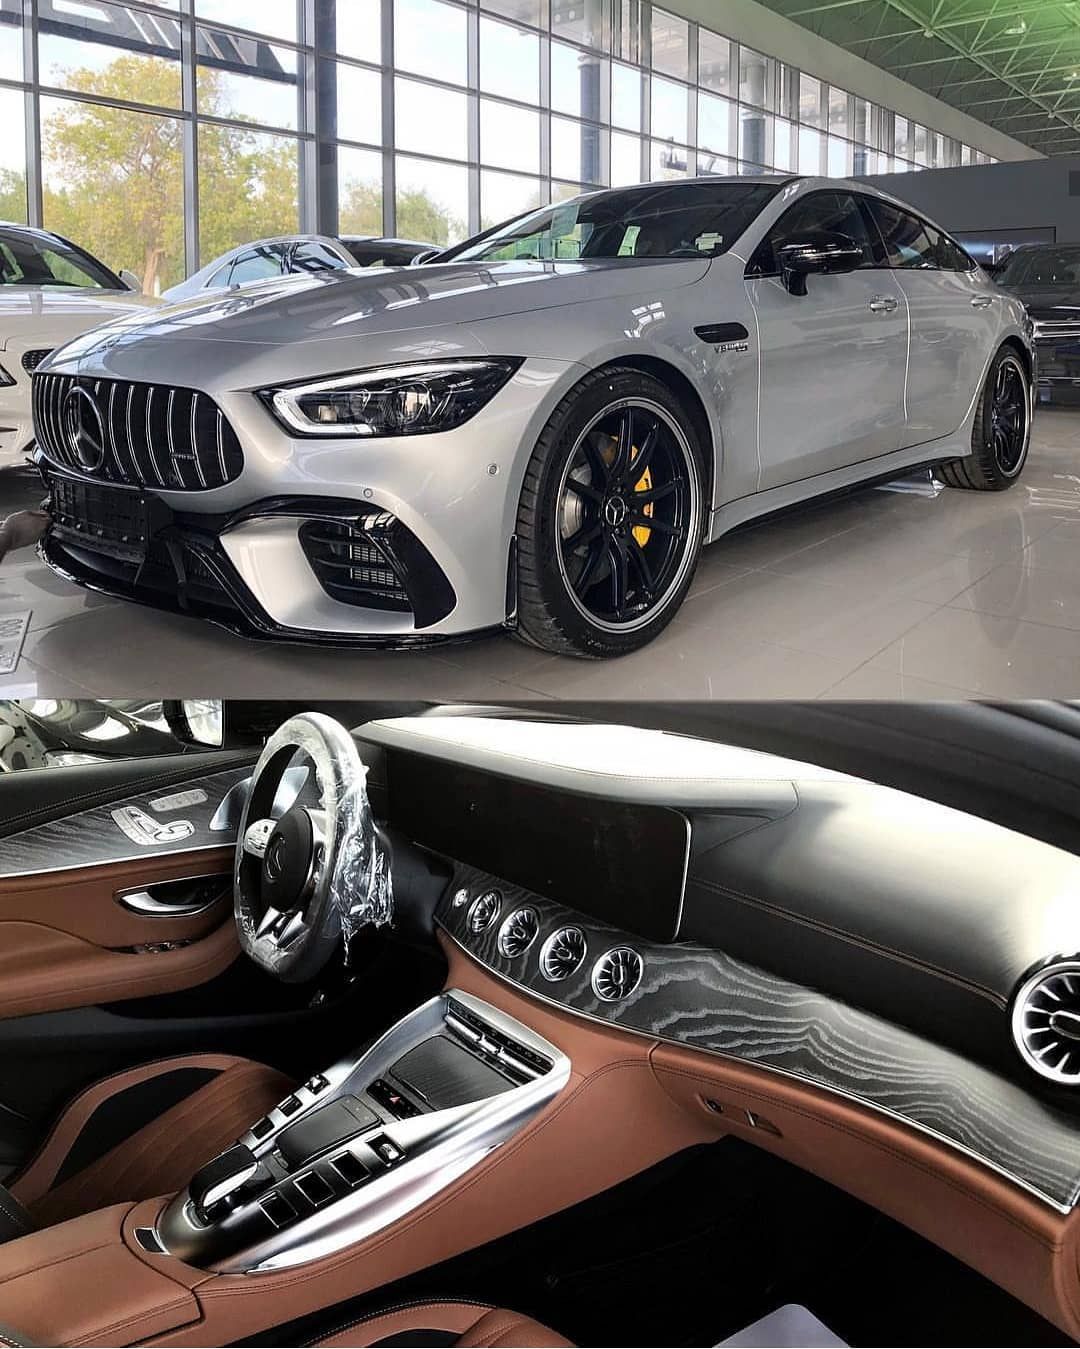 @car on Instagram: “The Mercedes AMG GT63 is supposed to be the 4 door version of the sports car AMG GT. It can produce up to 630 horsepower, includes race and…”